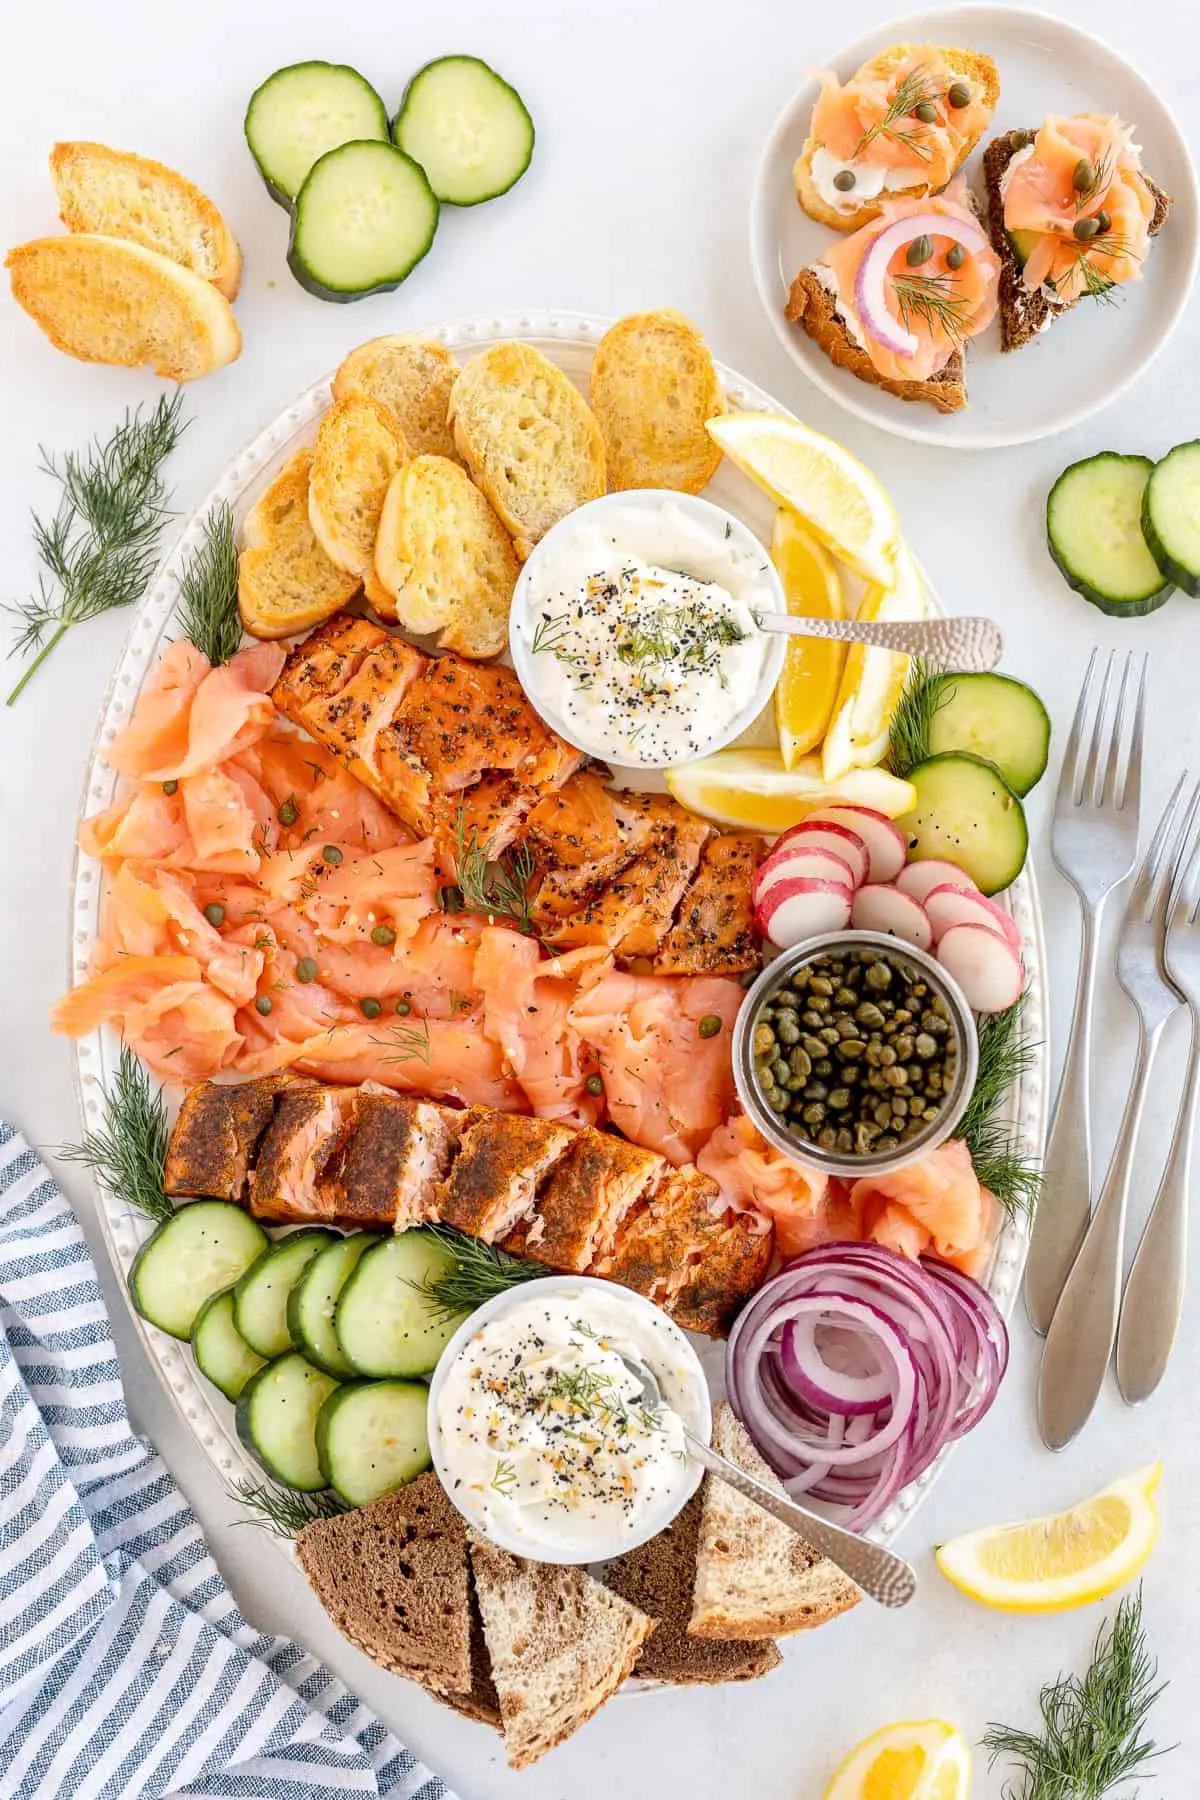 how to display smoked salmon platter - How to present a side of smoked salmon